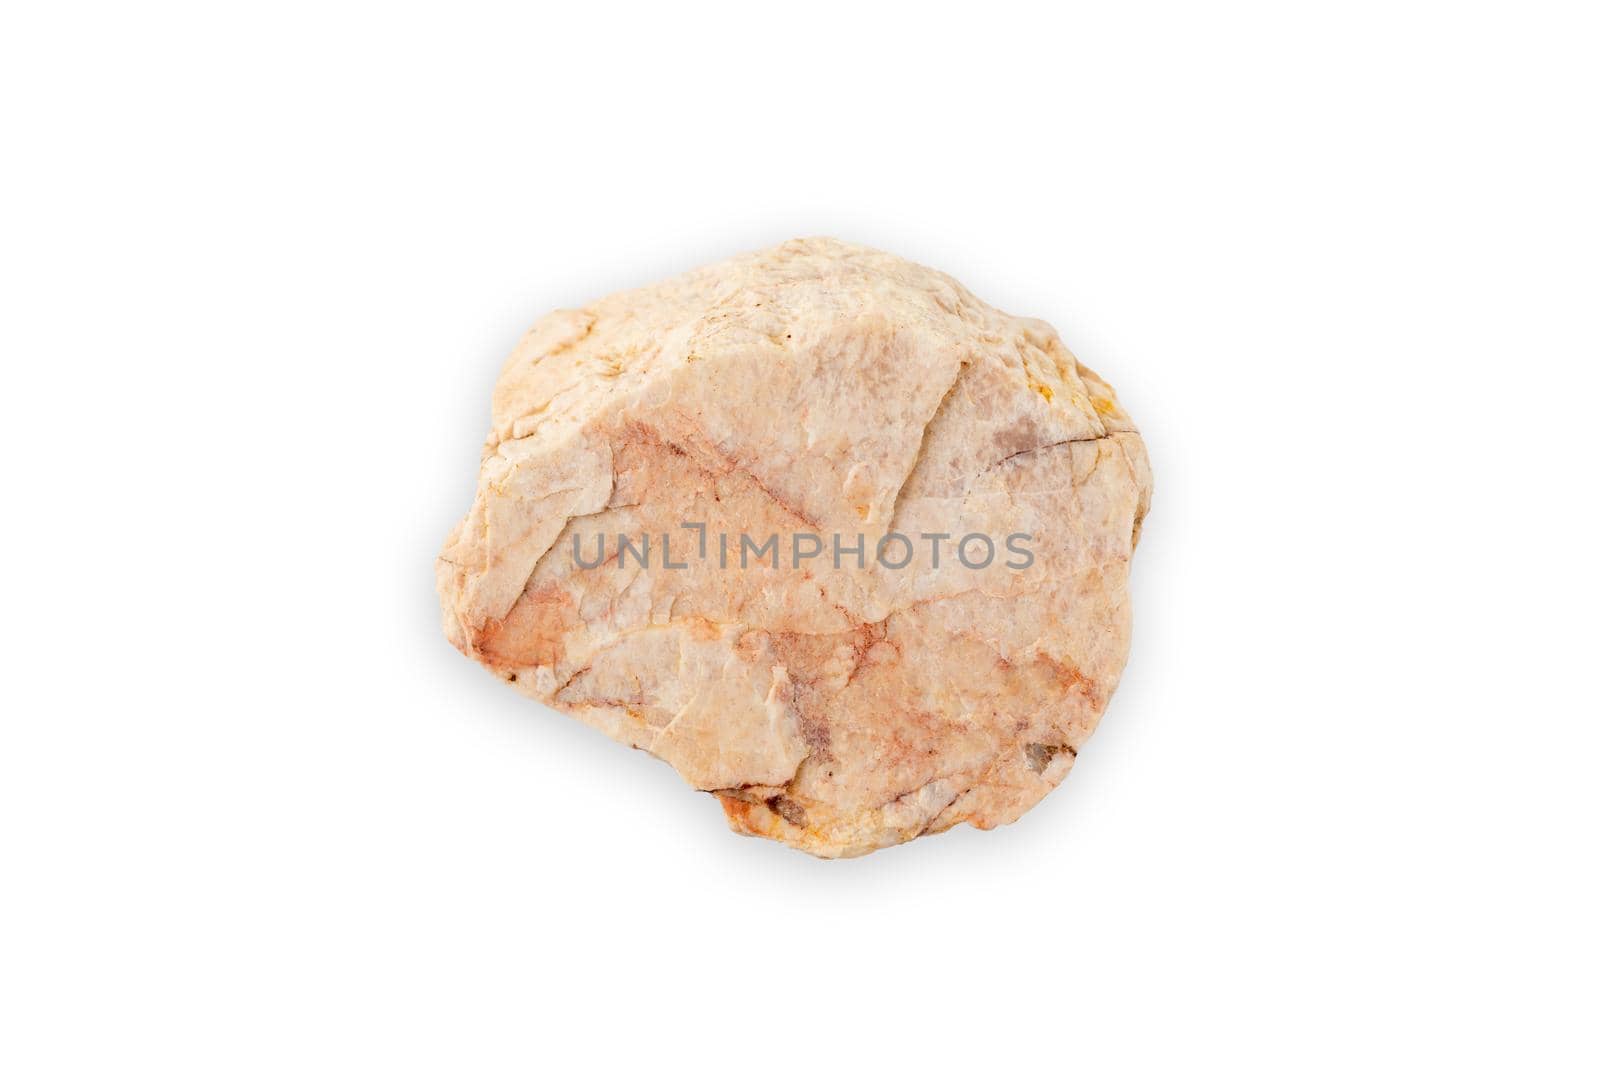 Mineral stone close-up isolated on a white background. A piece of granite or stone on a white background.